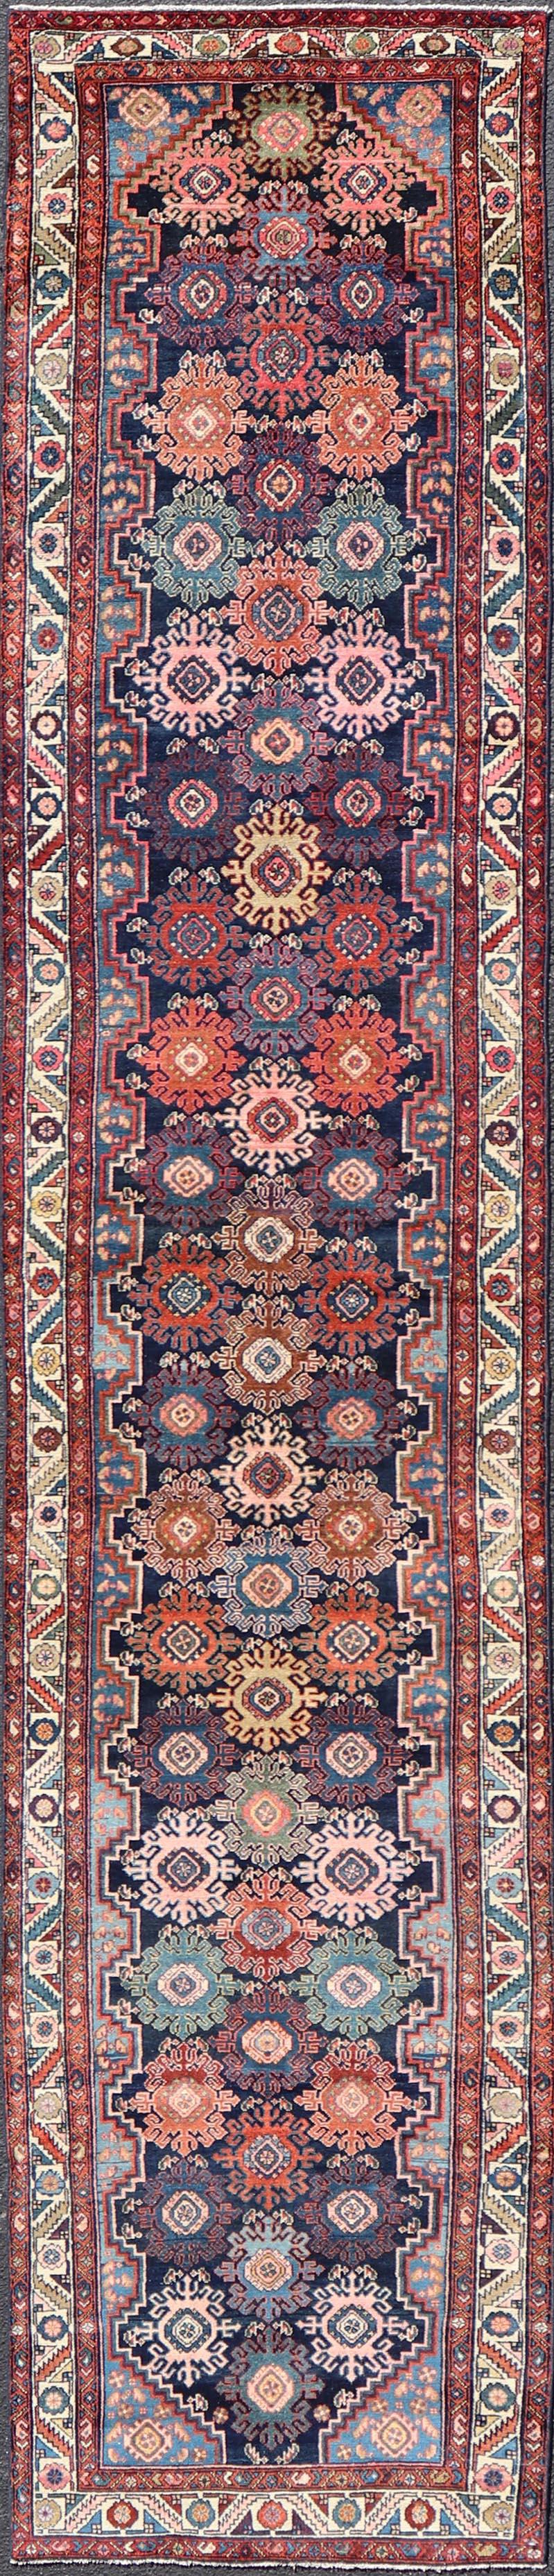 Antique Persian Hamadan Runner with All-Over Geometric Motifs In Jewel Tones For Sale